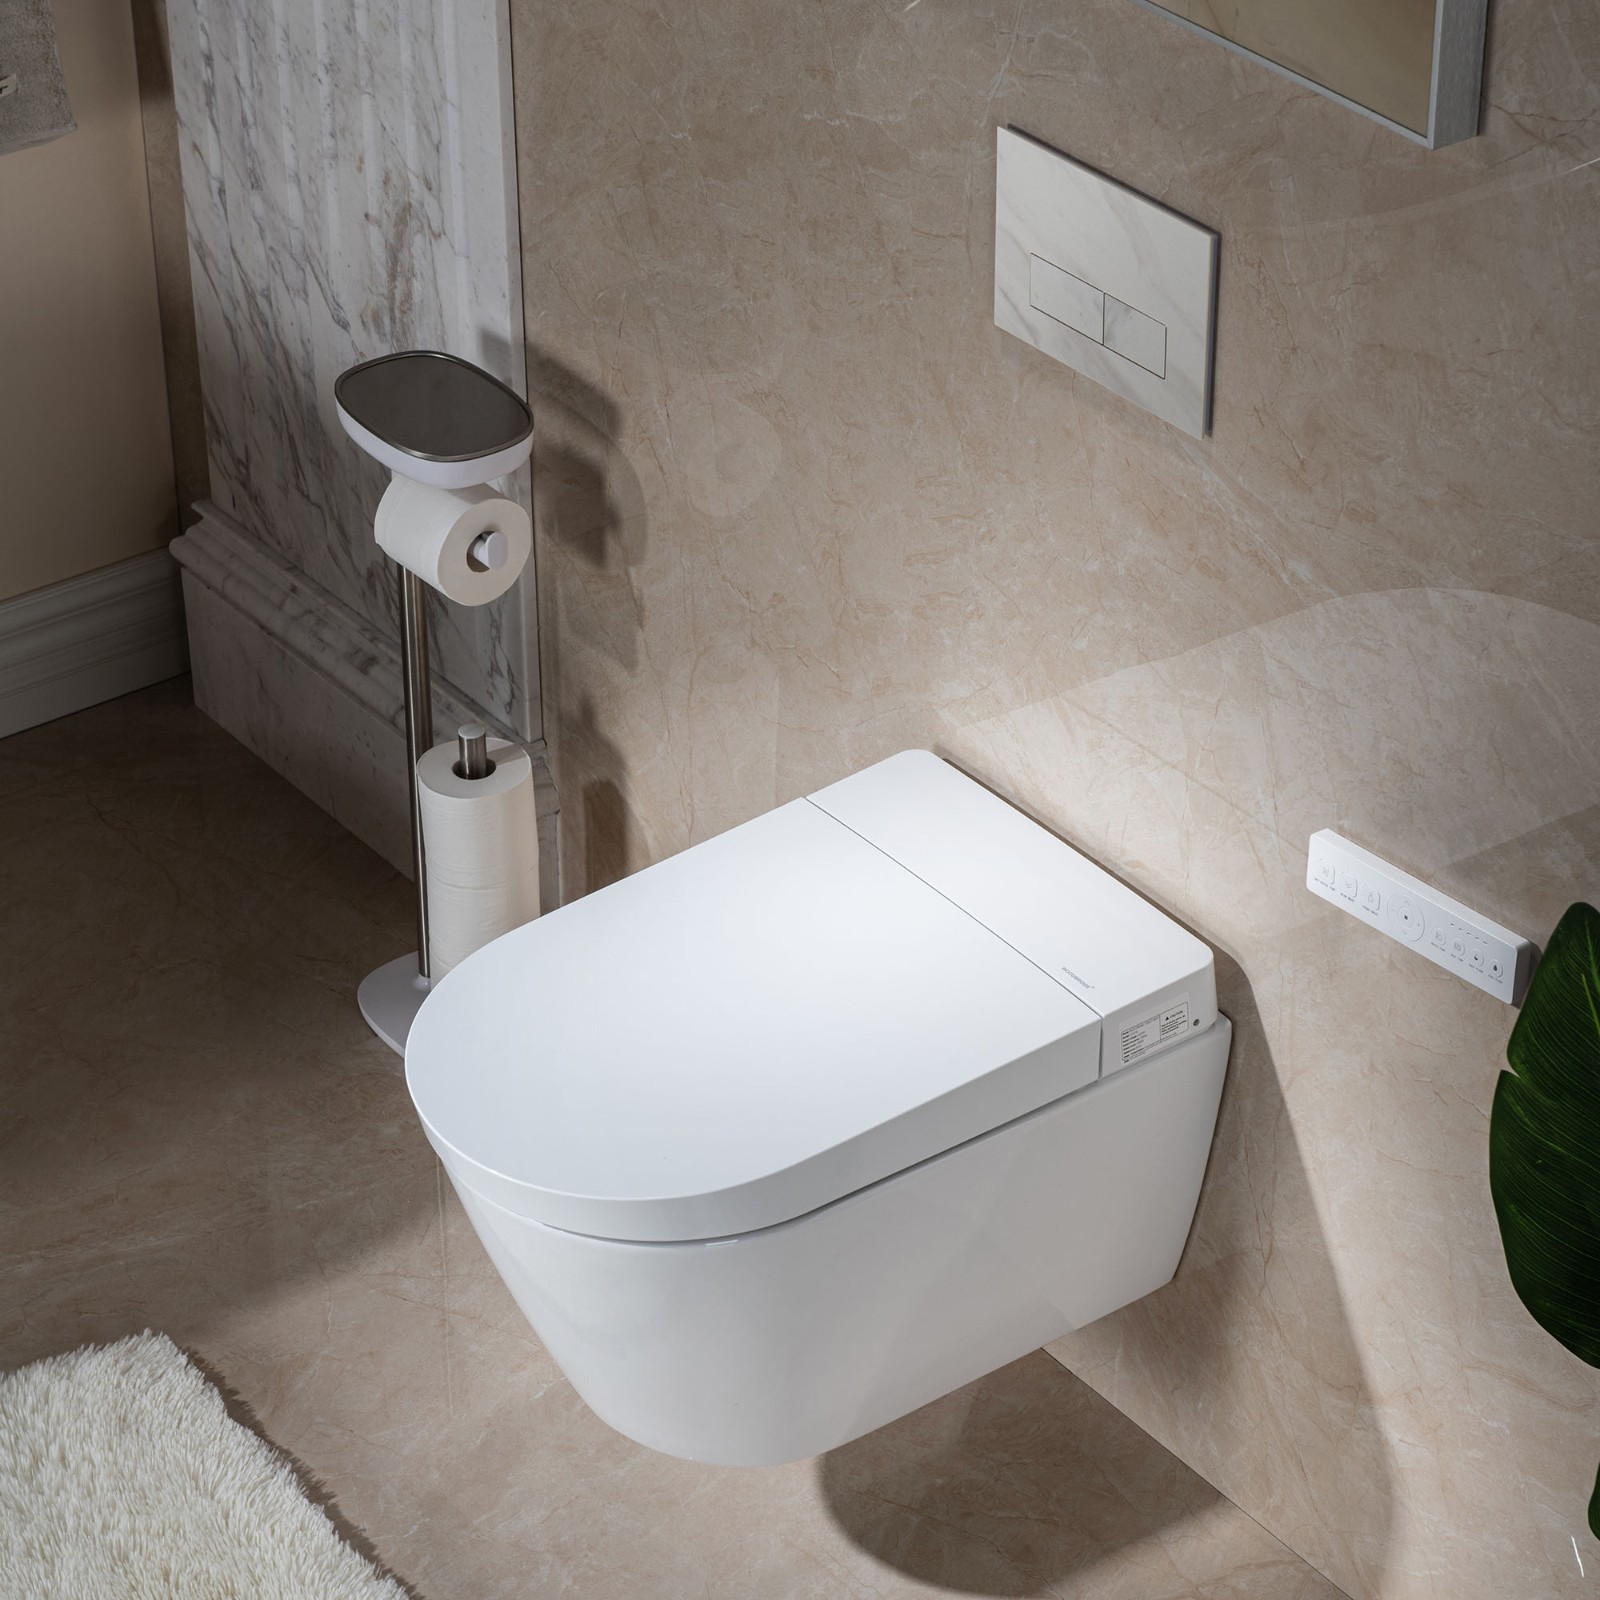  WOODBRIDGE  Intelligent Compact Elongated Dual-flush wall hung toilet with Bidet Wash Function, Heated Seat & Dryer. Matching Concealed Tank system and White Marble Stone Slim Flush Plates Included.LT611 + SWHT611+FP611-WH_546